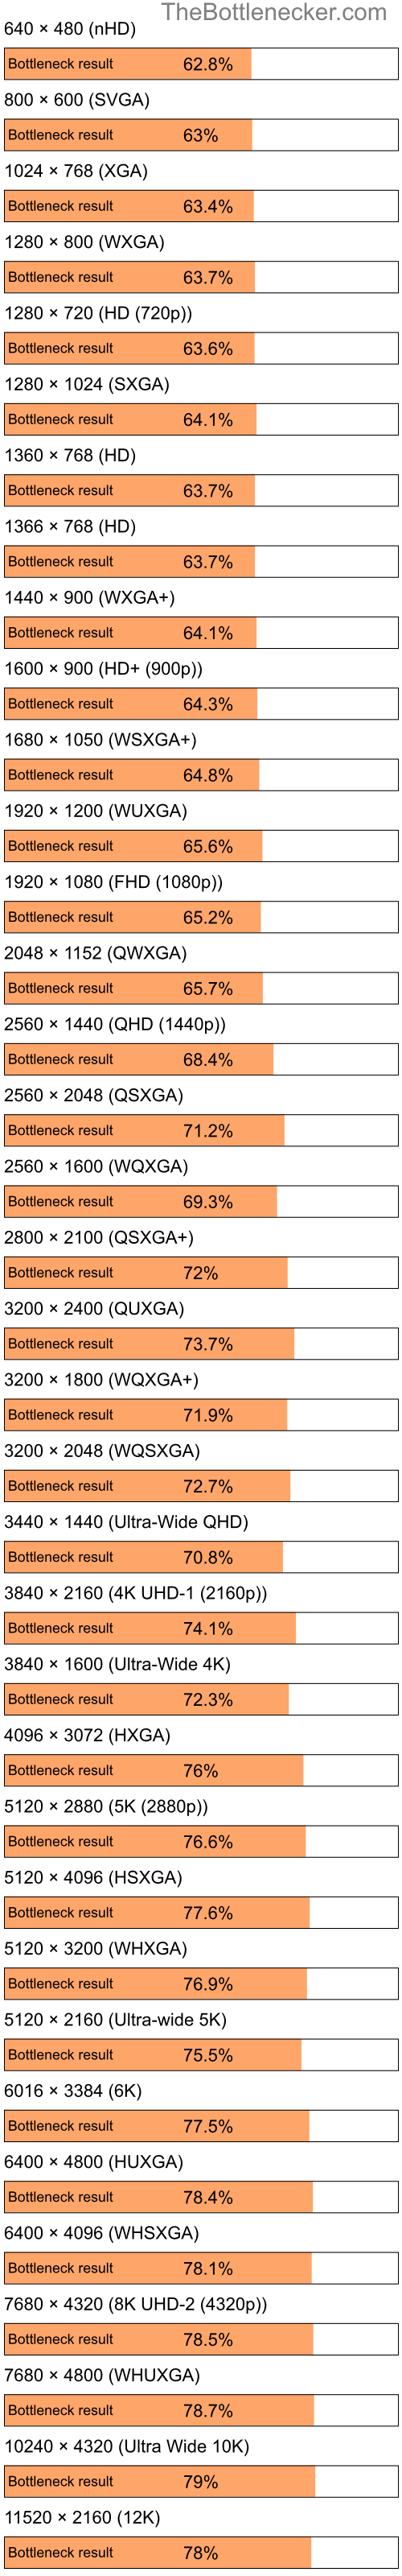 Bottleneck results by resolution for Intel Pentium 4 and AMD Mobility Radeon X600 in Processor Intense Tasks